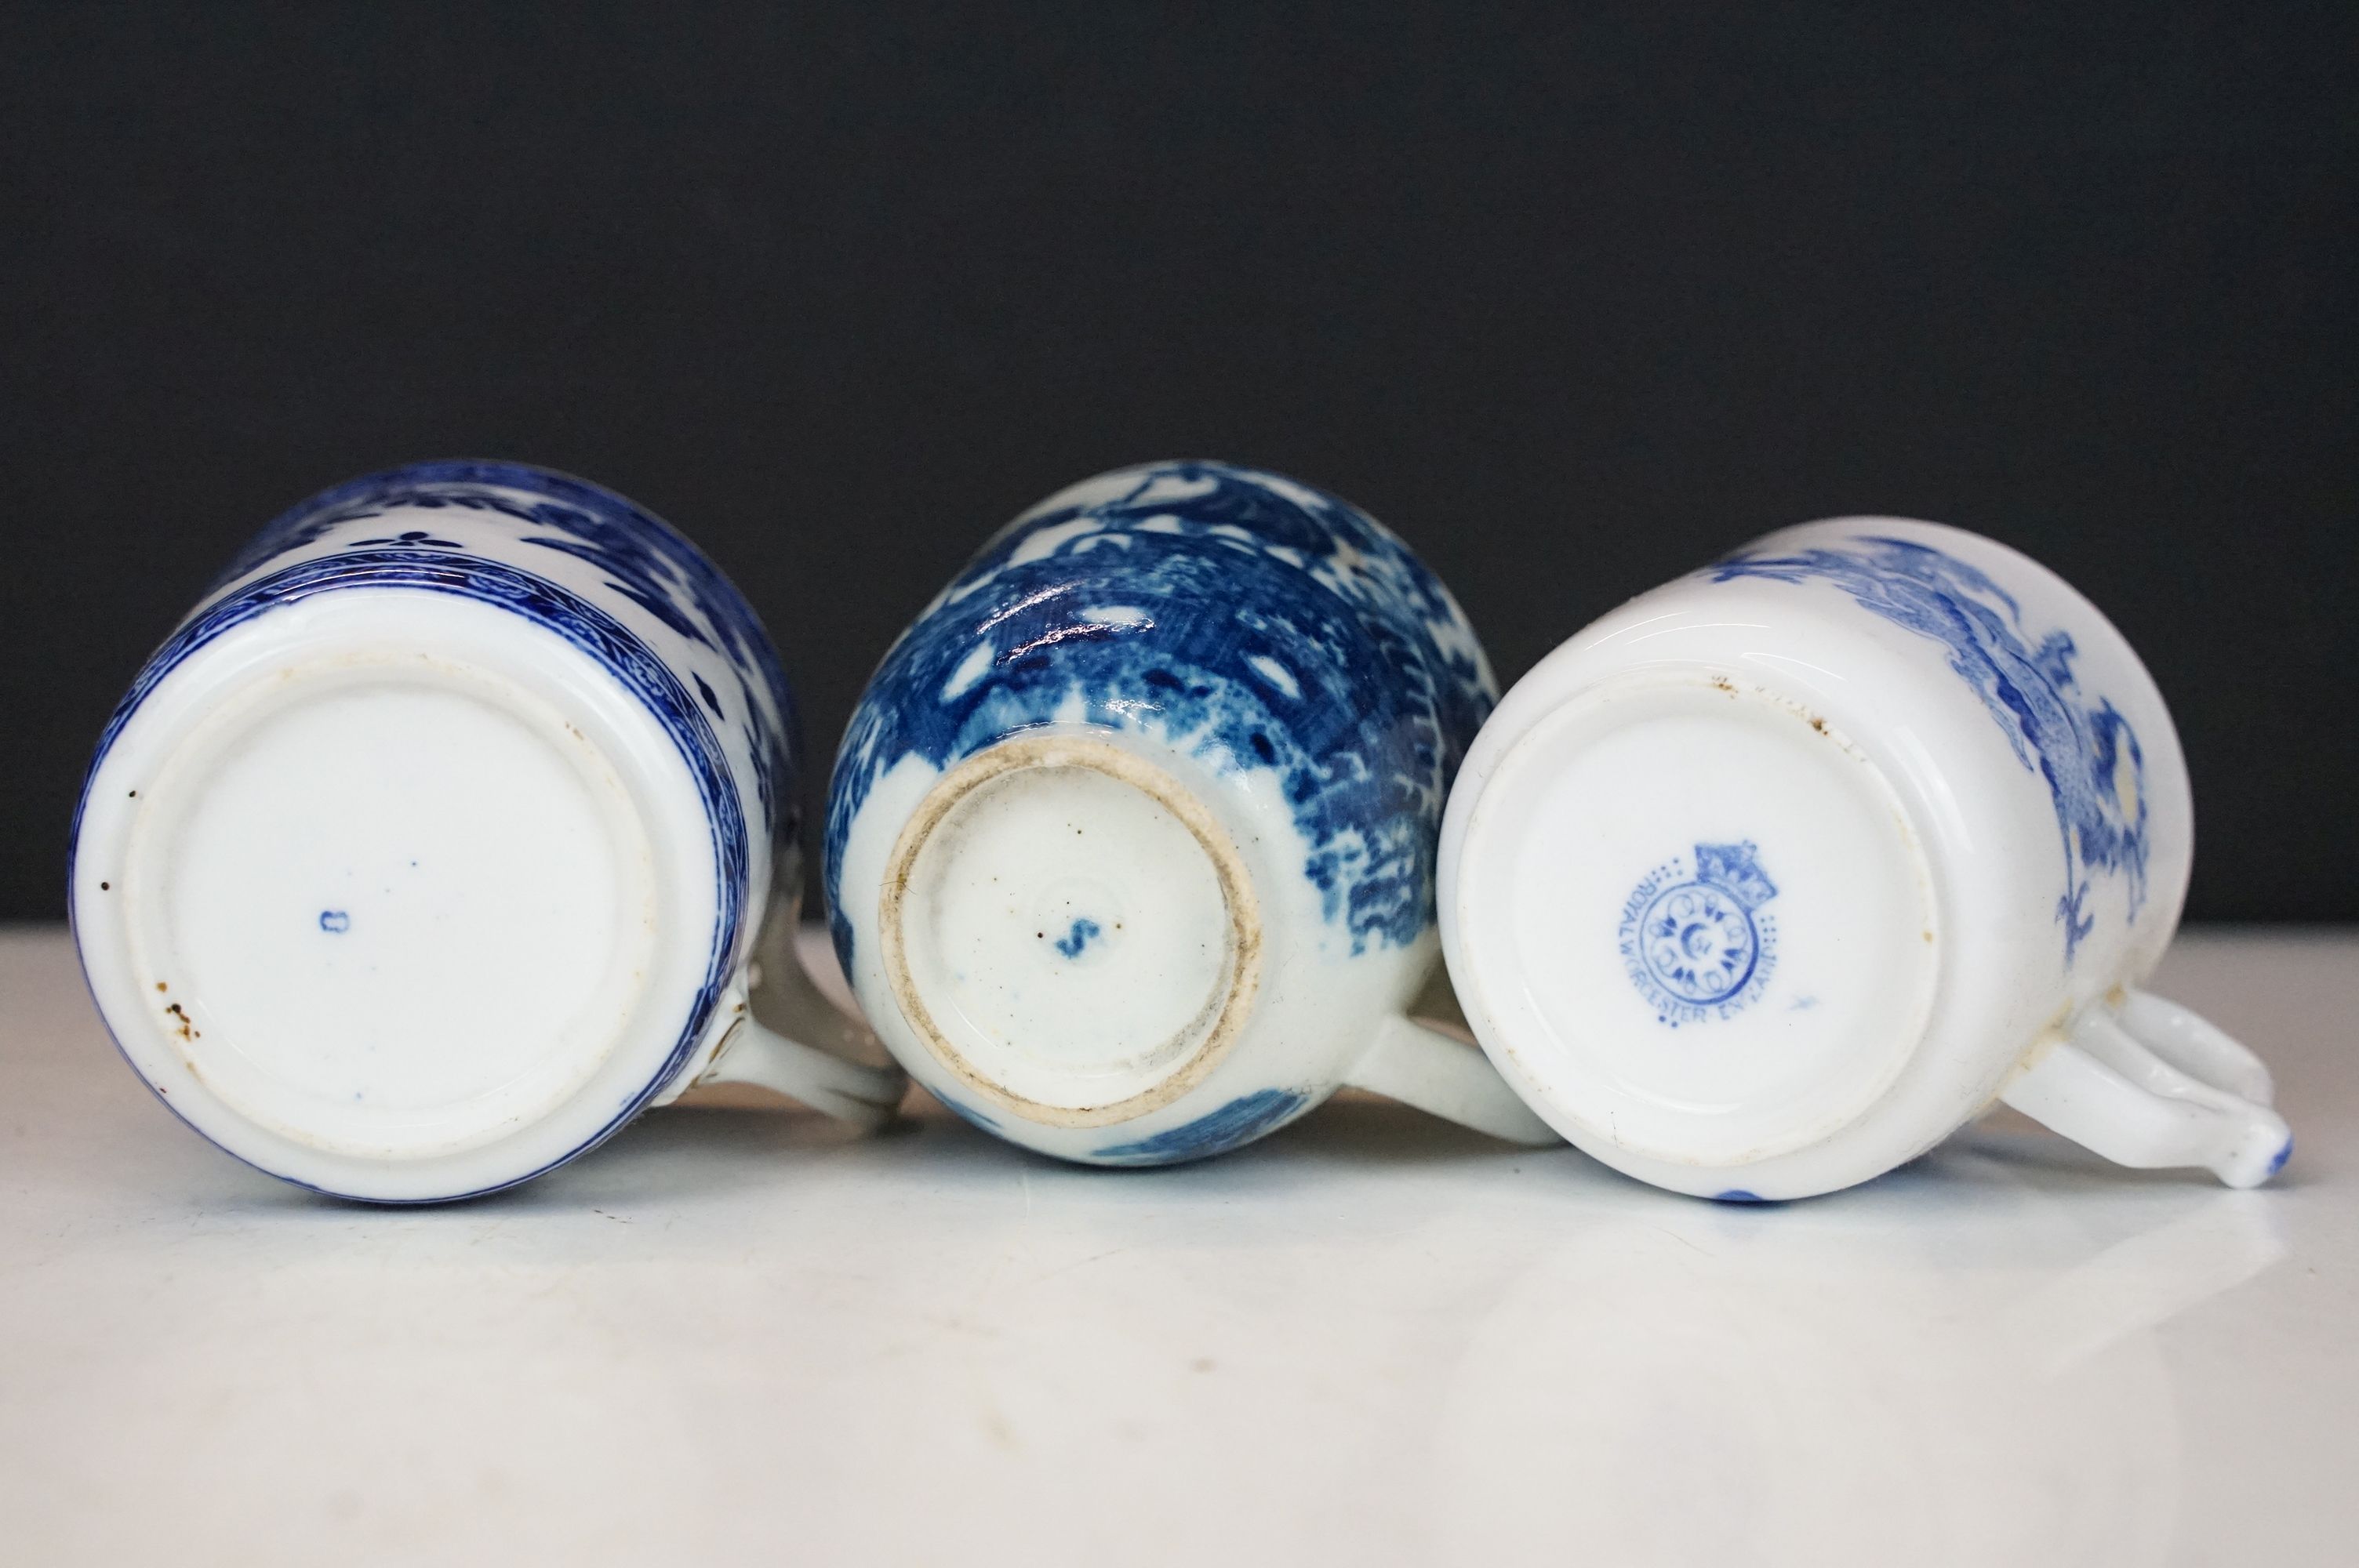 Collection of 19th century blue & white English porcelain, featuring early 19th C examples, to - Image 11 of 13